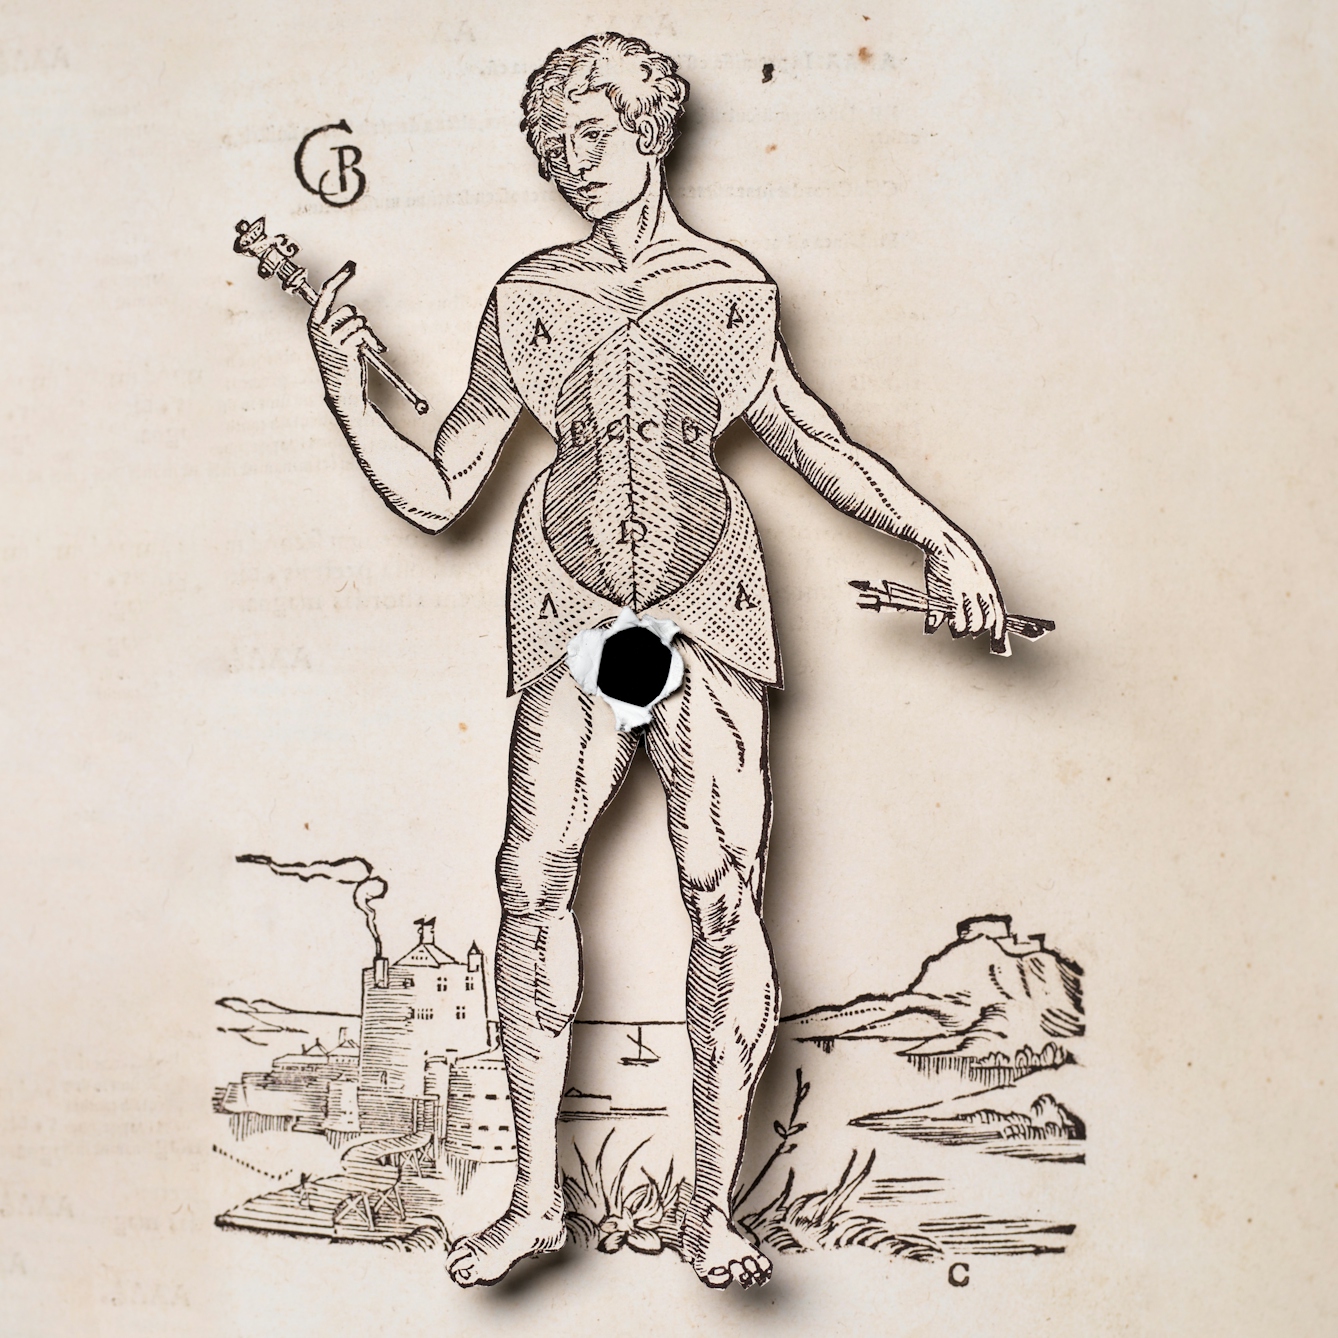 Photograph of an illustration of a naked man where the body of the man has been cut out and lifted above the background. Where the man's genitals should be there is a black hole with the torn edges folded forwards.